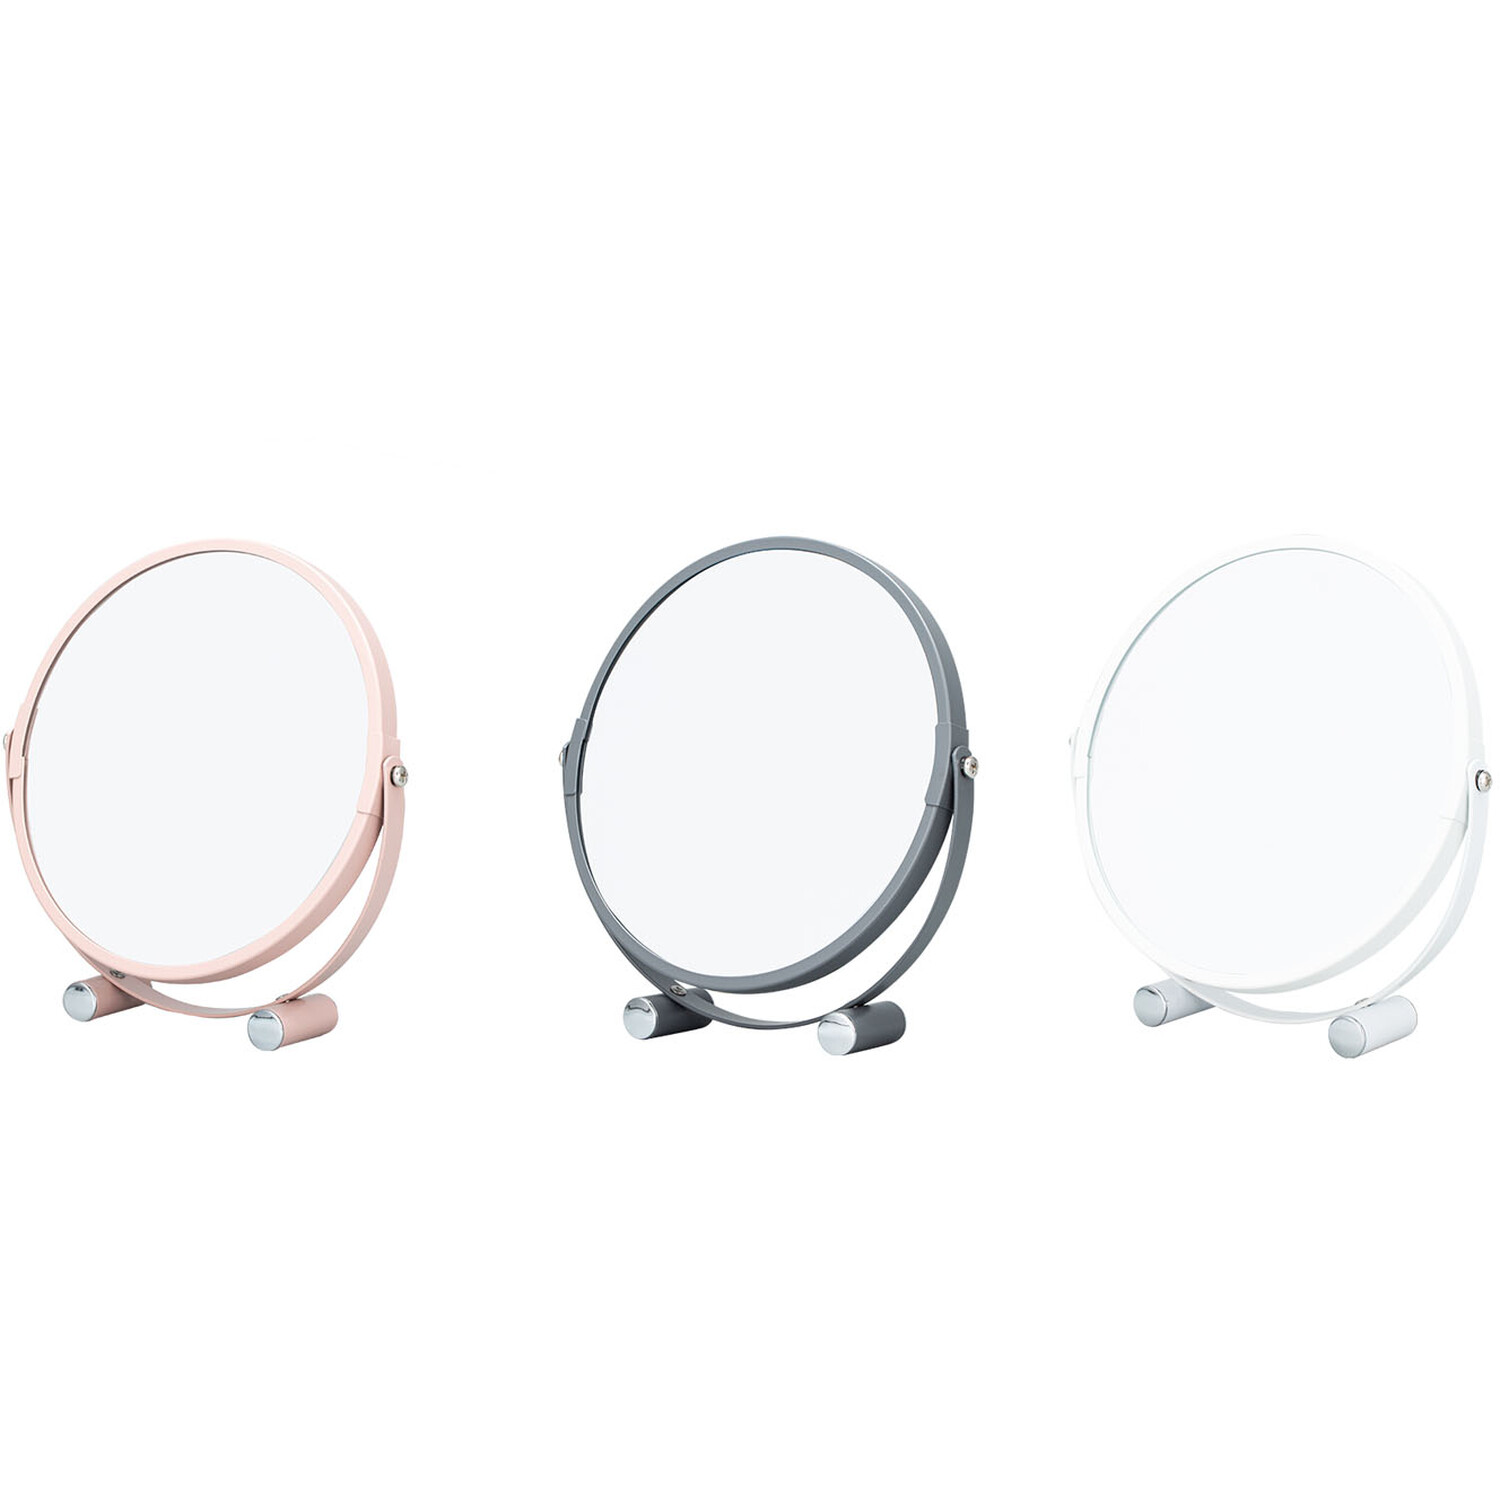 Single Cosmetic Mirror in Assorted styles Image 1